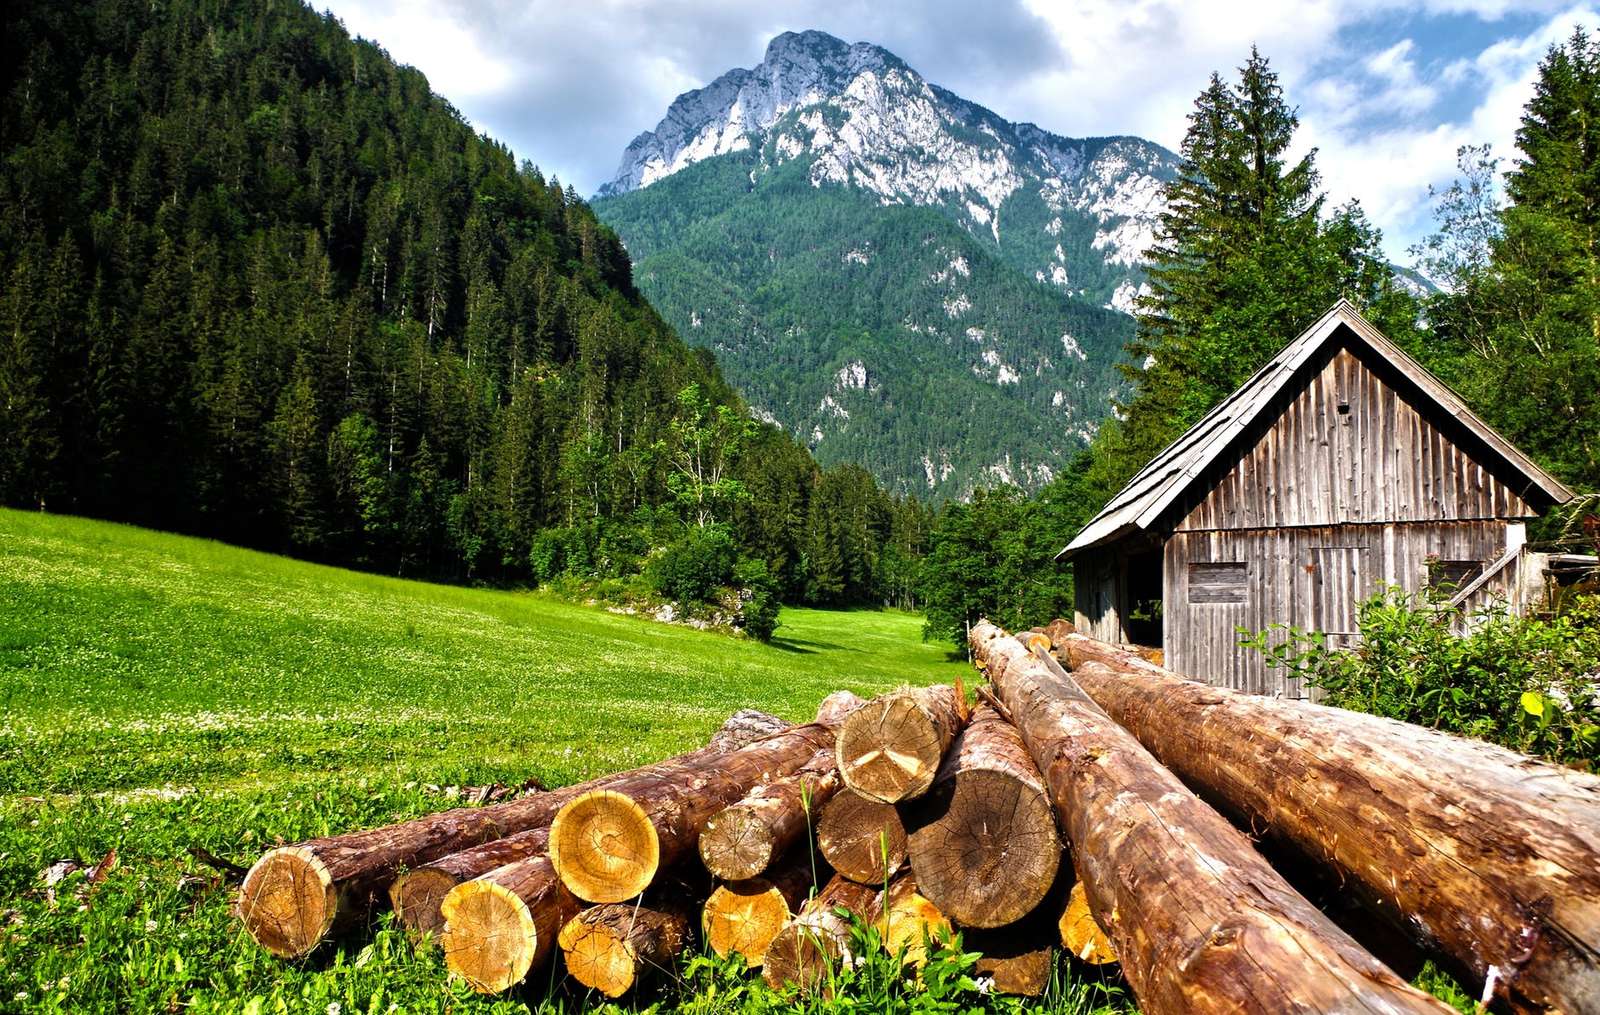 lots of wood at the hut jigsaw puzzle online